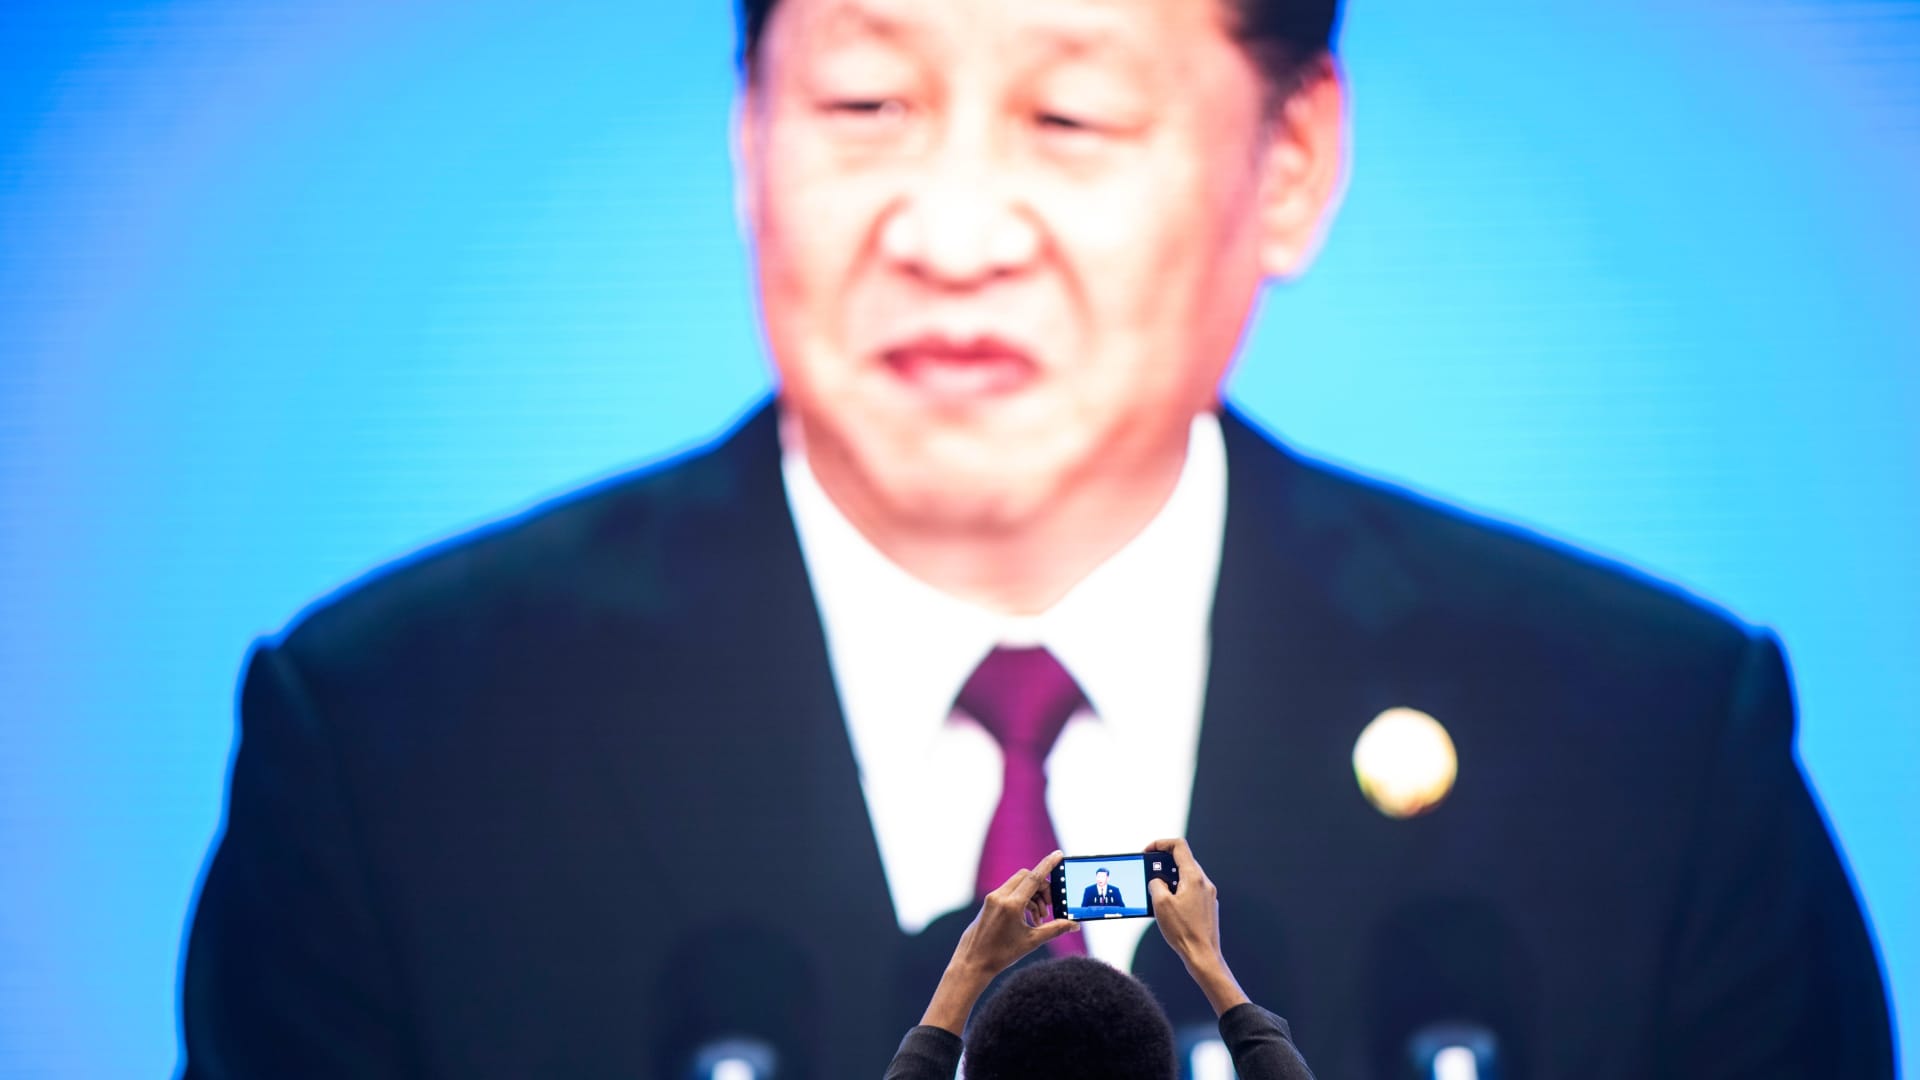 China's President Xi Jinping is seen on a big screen in Shanghai on November 5, 2018.